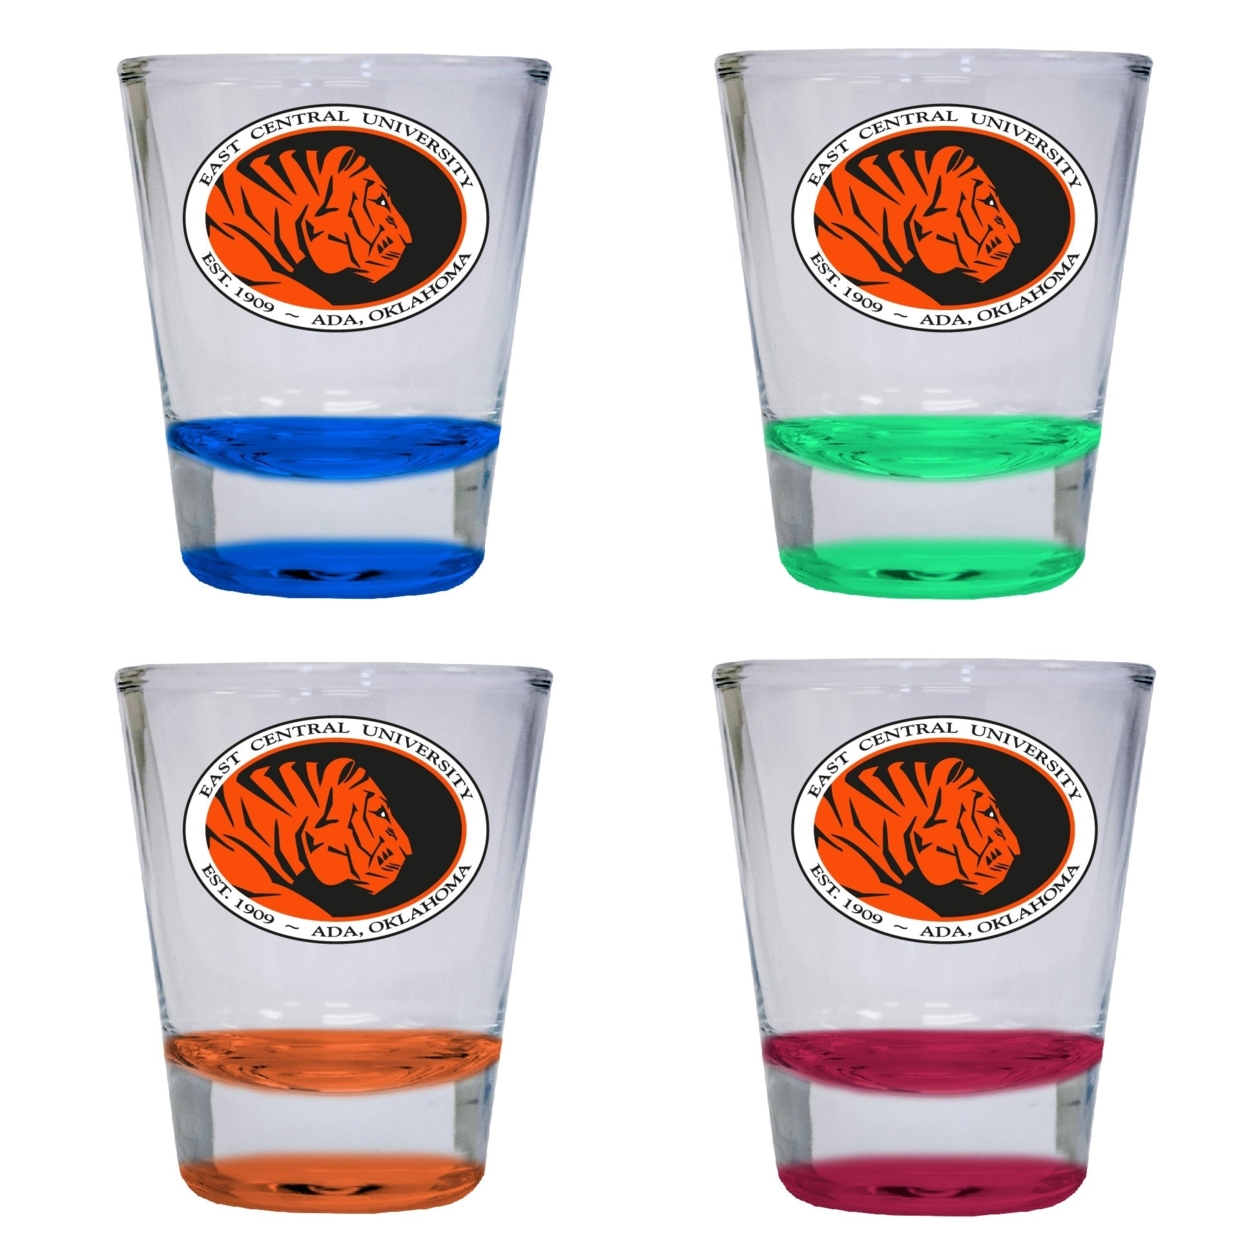 East Central University Tigers 2 Ounce Color Etched Shot Glasses - All Colors, 4-Pack